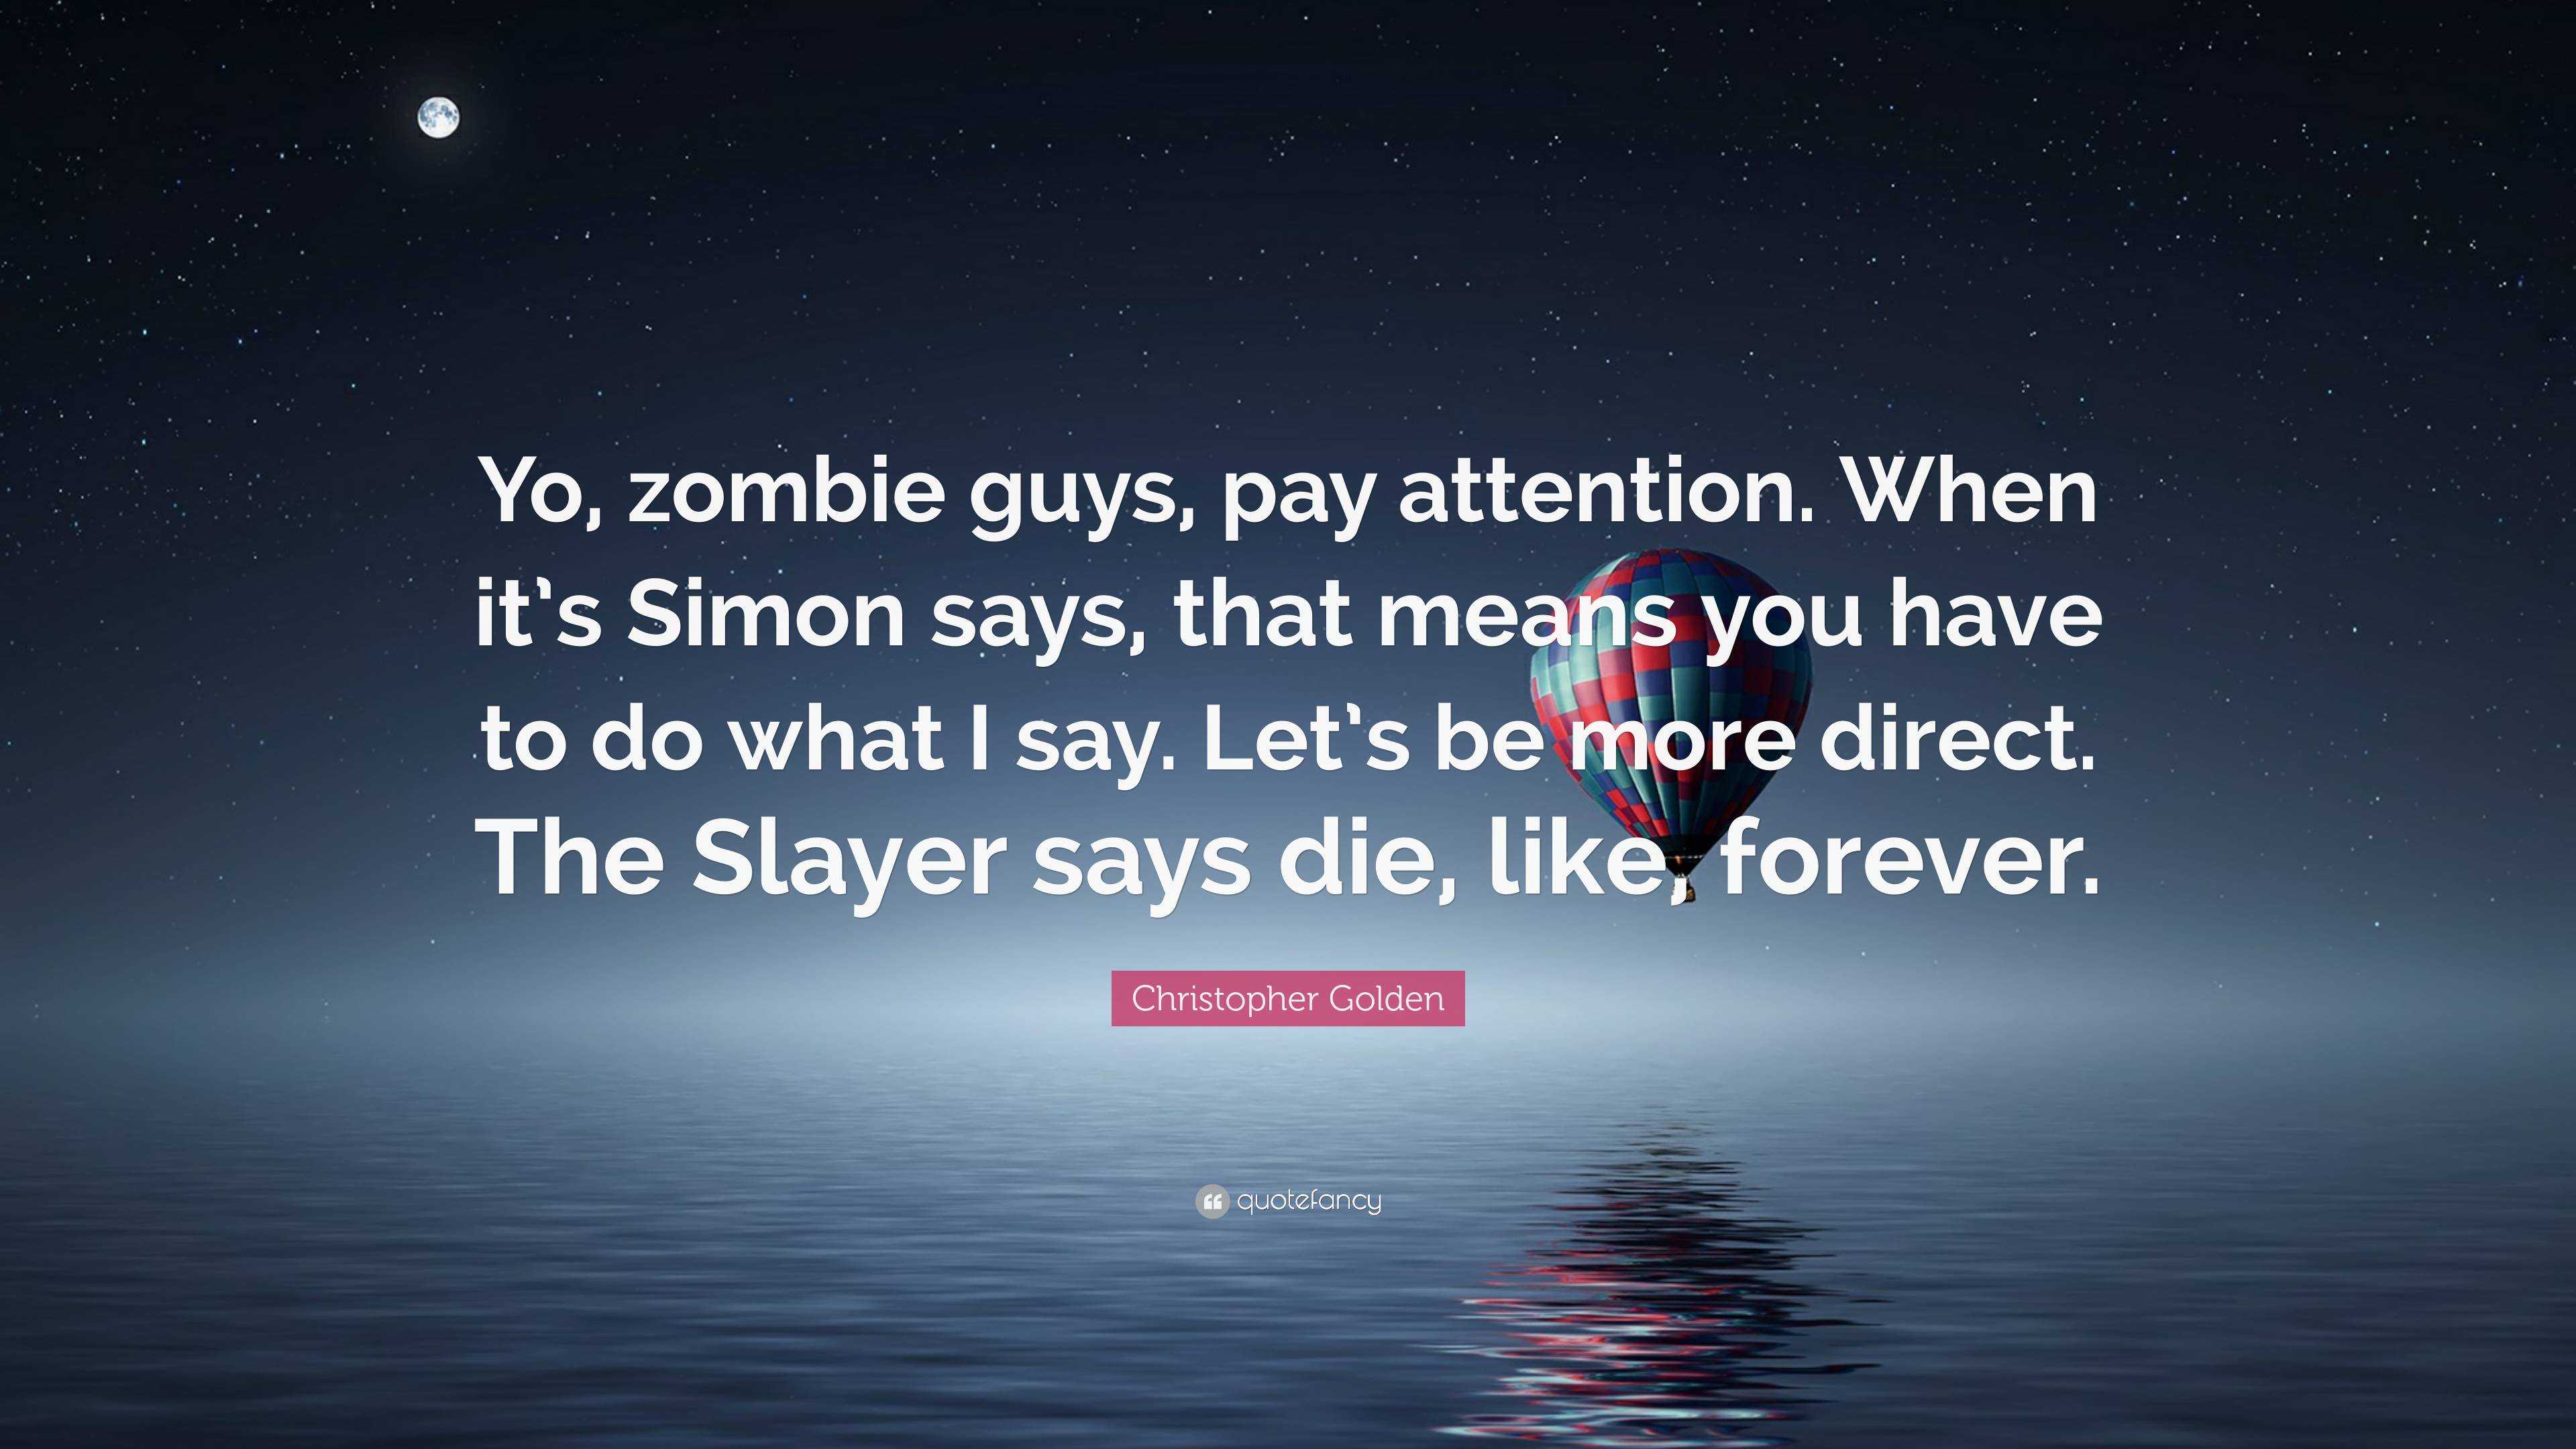 what more needs to be said?.SLAYER!!!!